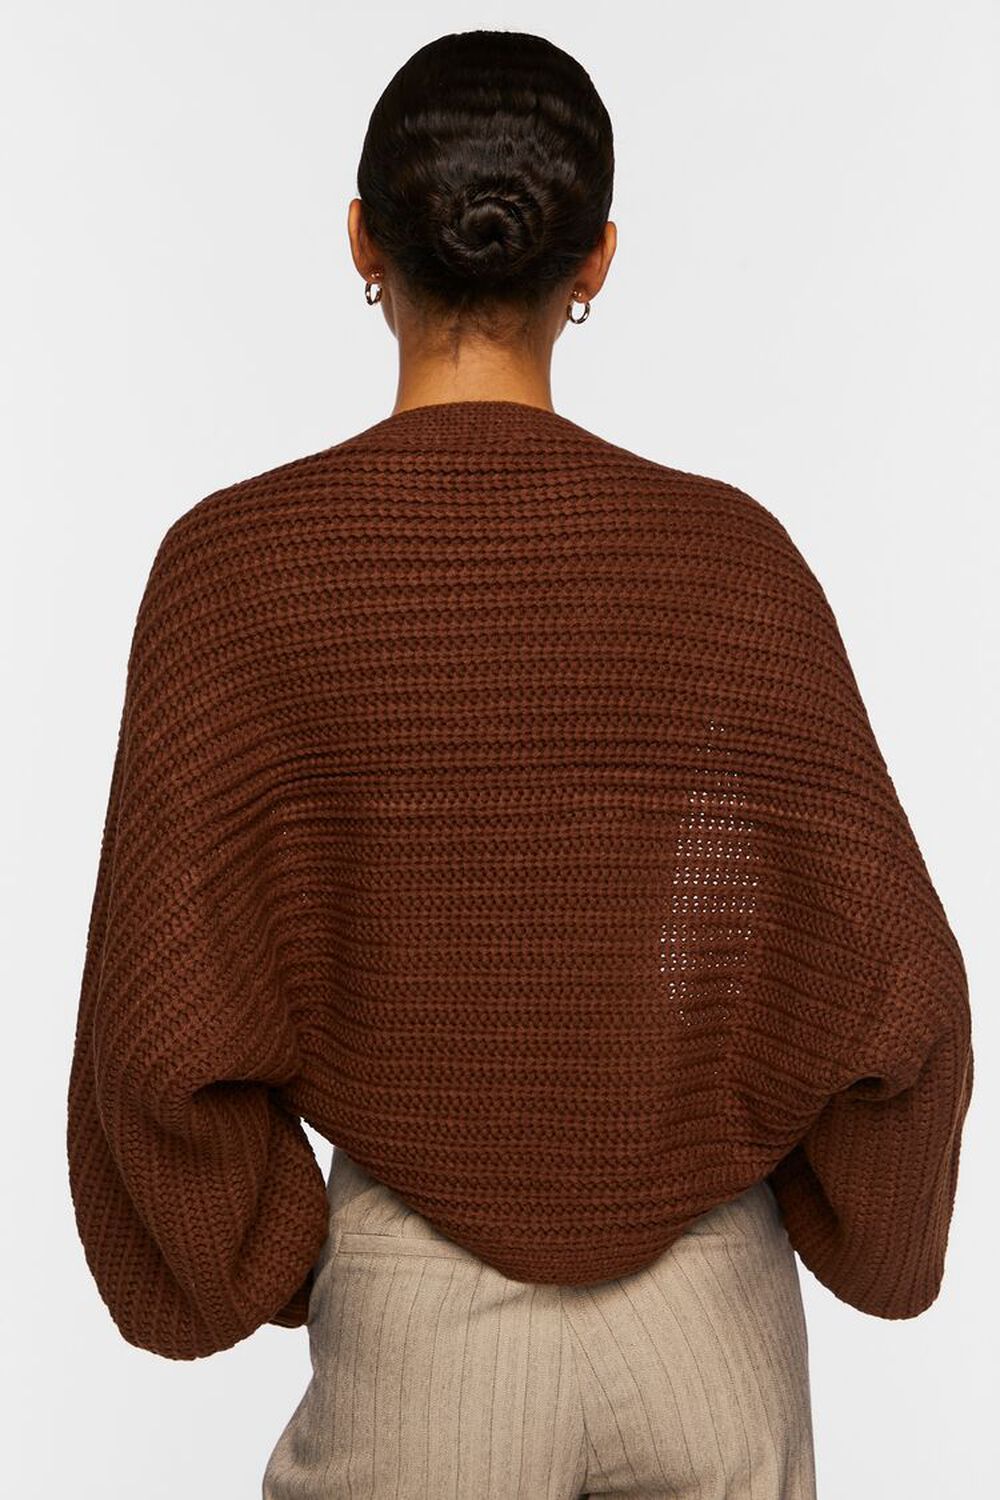 BROWN Batwing Open-Front Cardigan Sweater, image 3